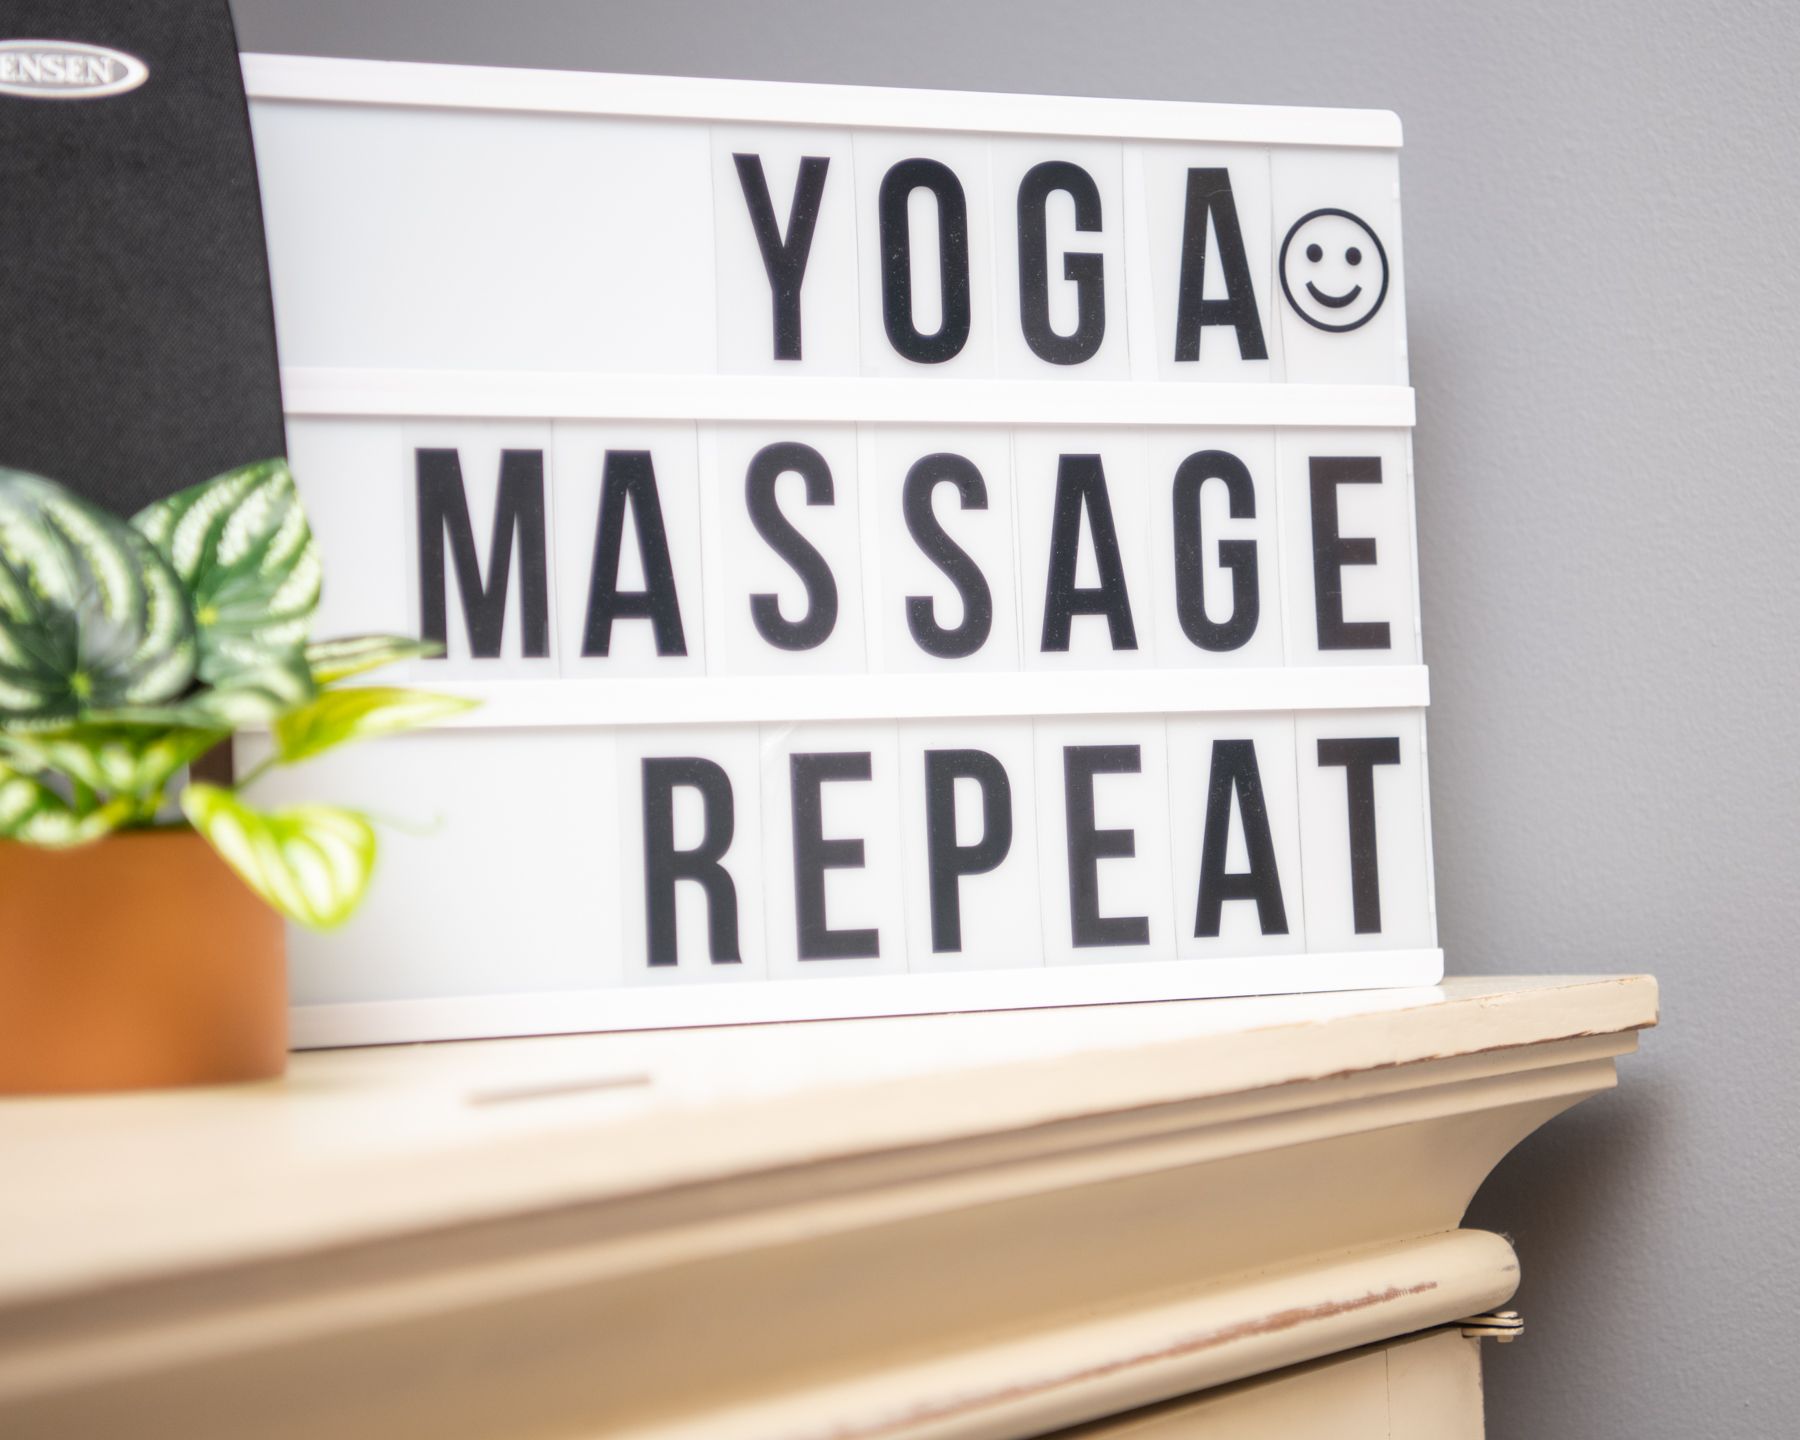 A sign that says "Yoga, massage, repeat," sits on a table at Willow Wellness Center in High Point, NC.